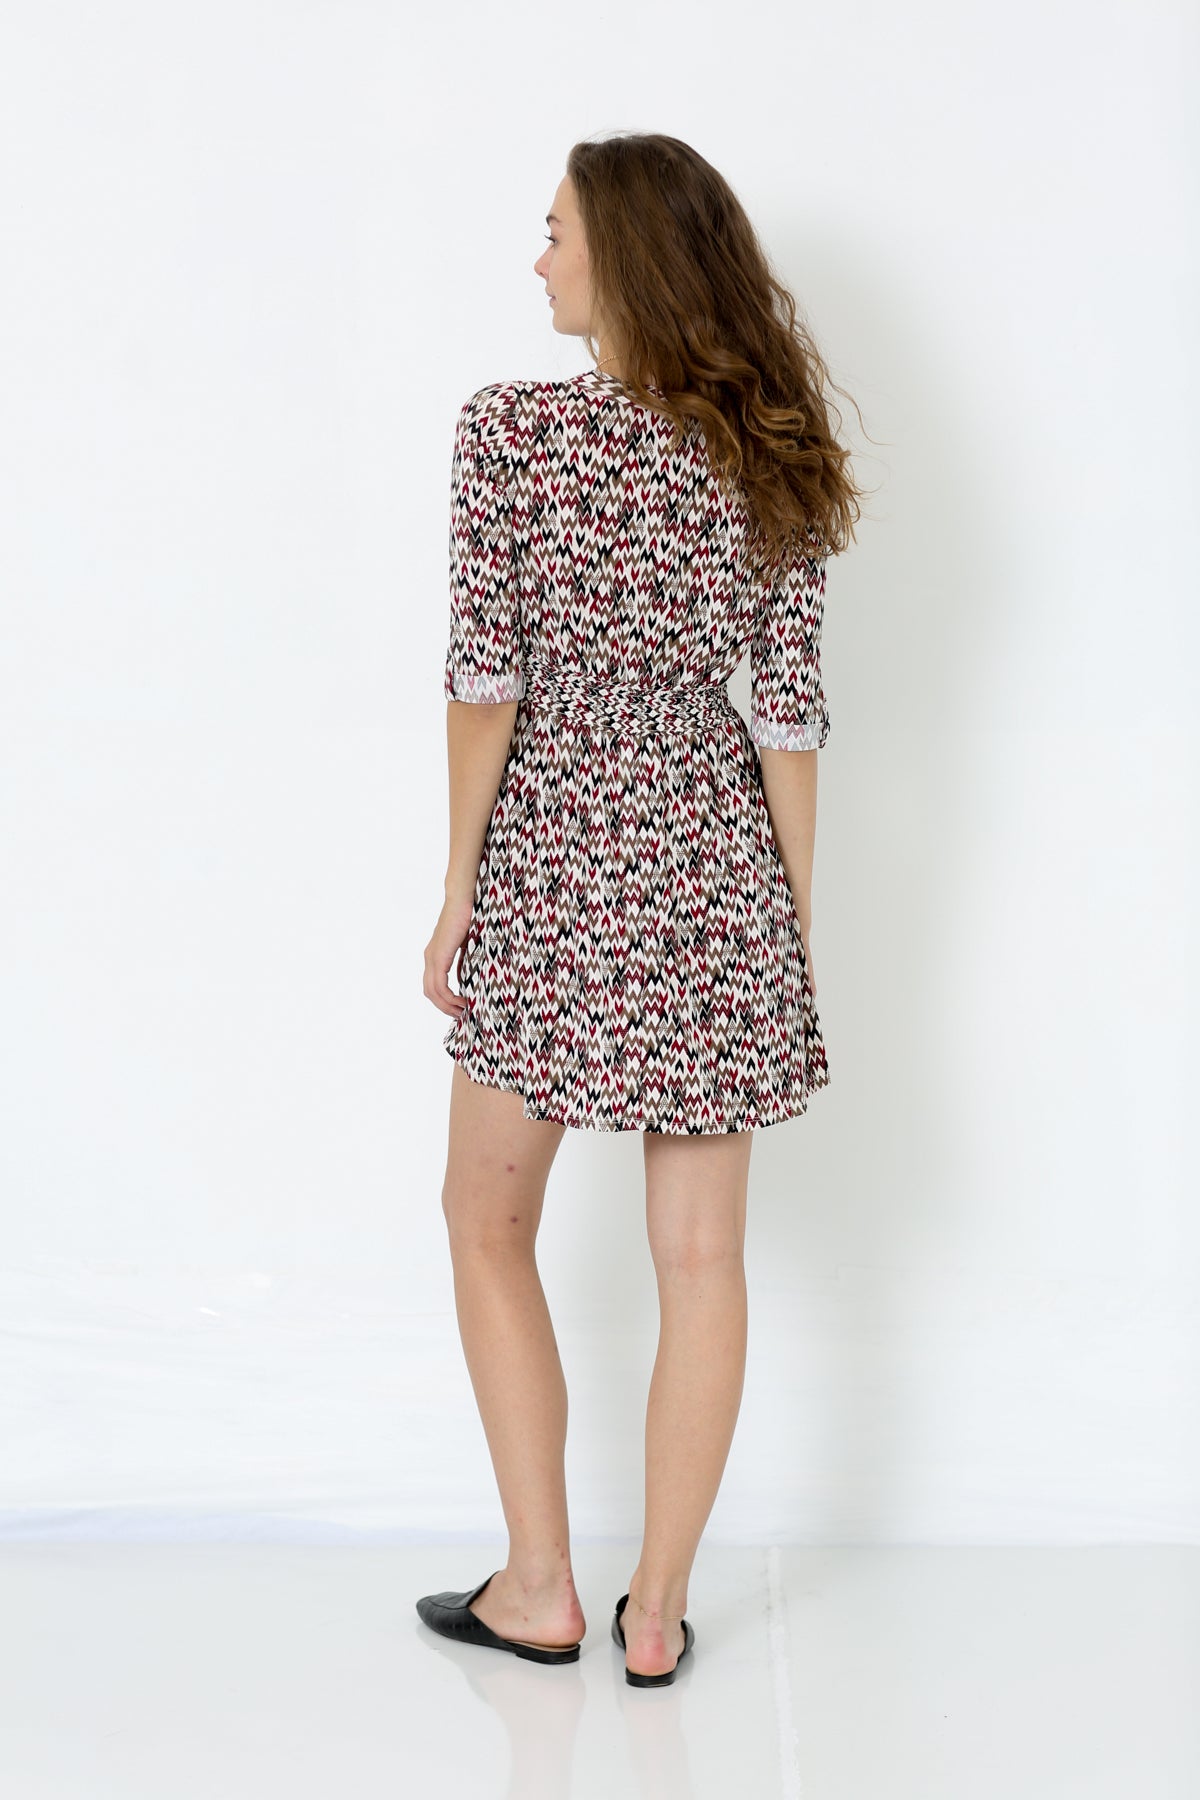 ELBOW ROLLED SLEEVE BUTTON UP DRESS - D2505-PE-RM-1905369